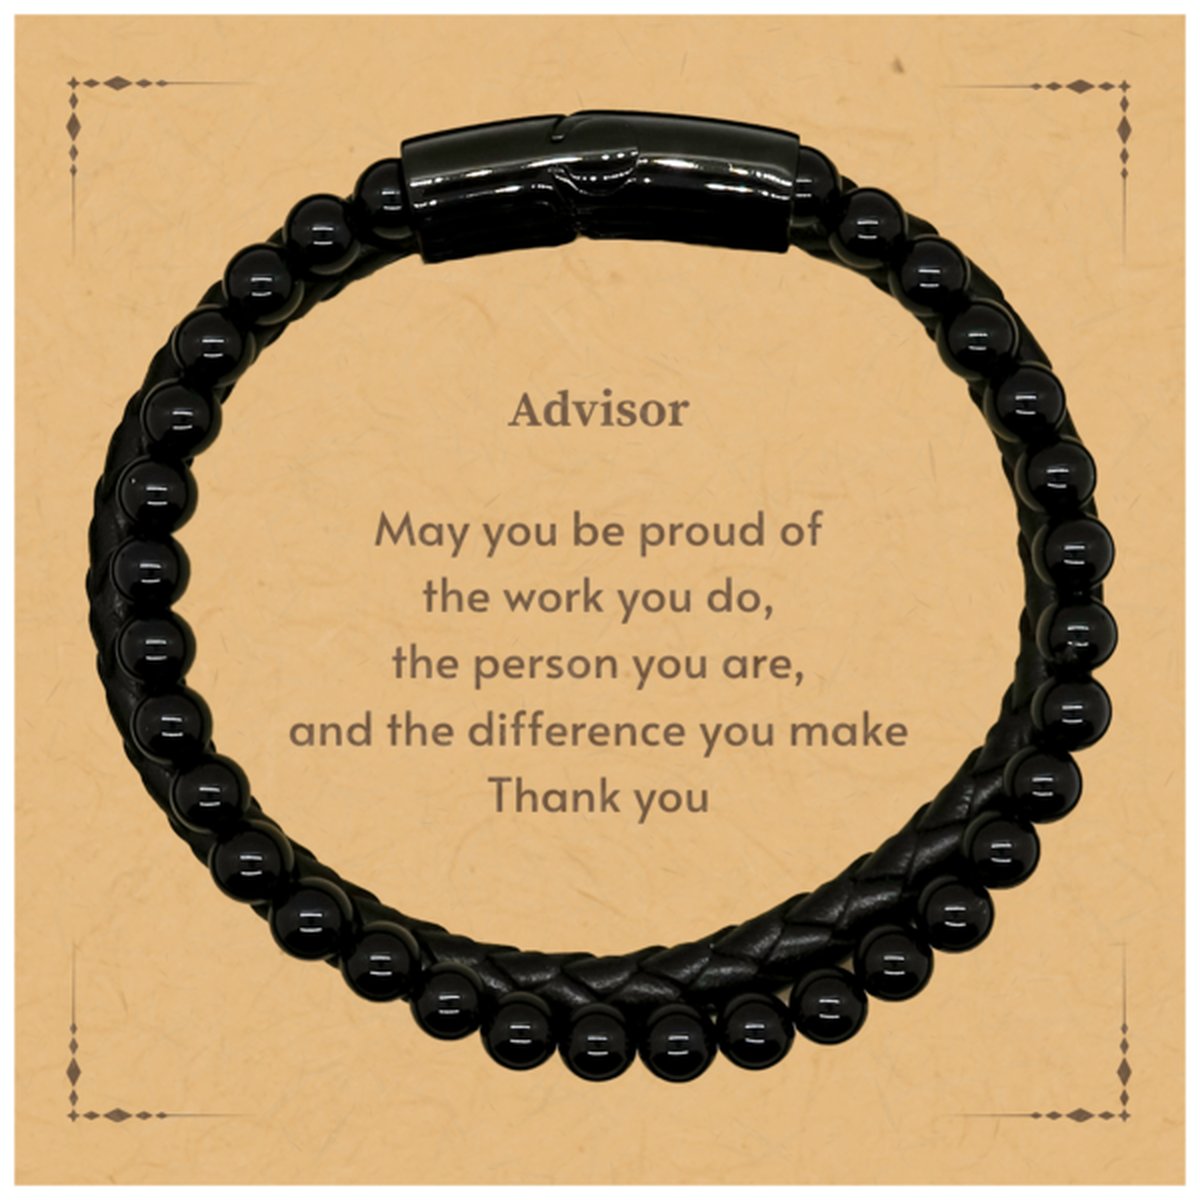 Heartwarming Stone Leather Bracelets Retirement Coworkers Gifts for Advisor, Advisor May You be proud of the work you do, the person you are Gifts for Boss Men Women Friends